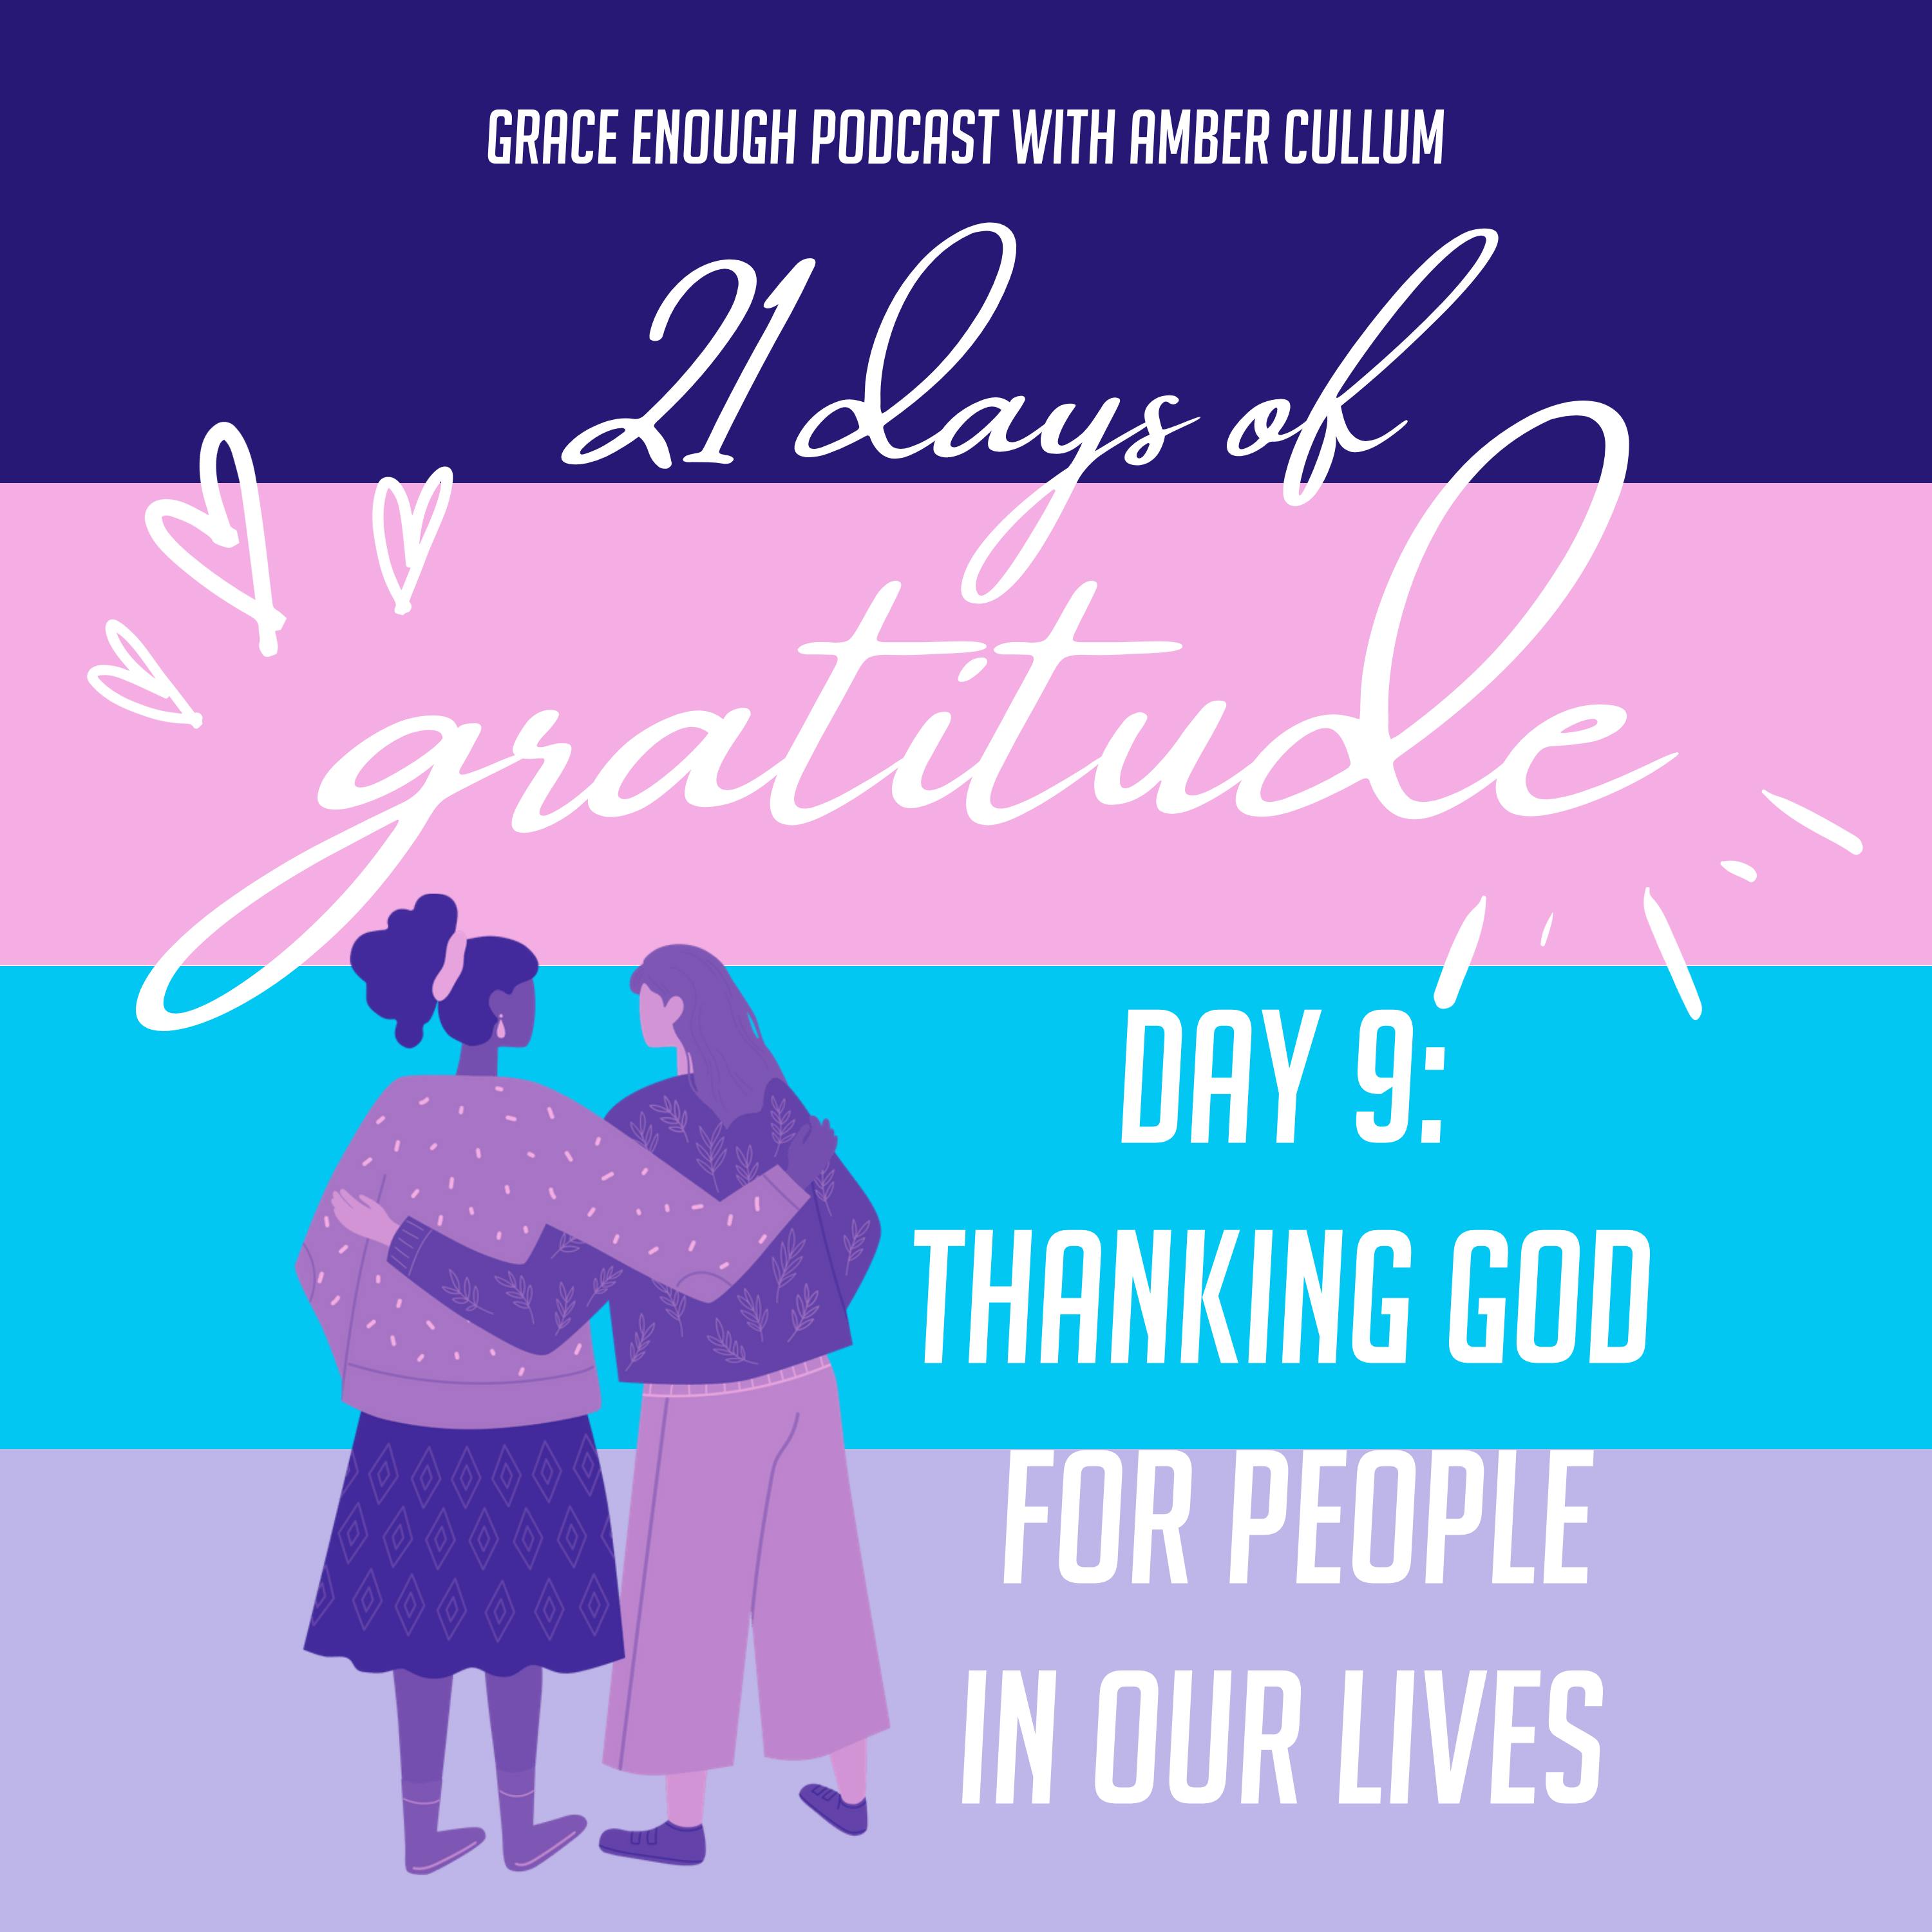 9/21 Days of Prayer: Thanking God for People in Our Lives